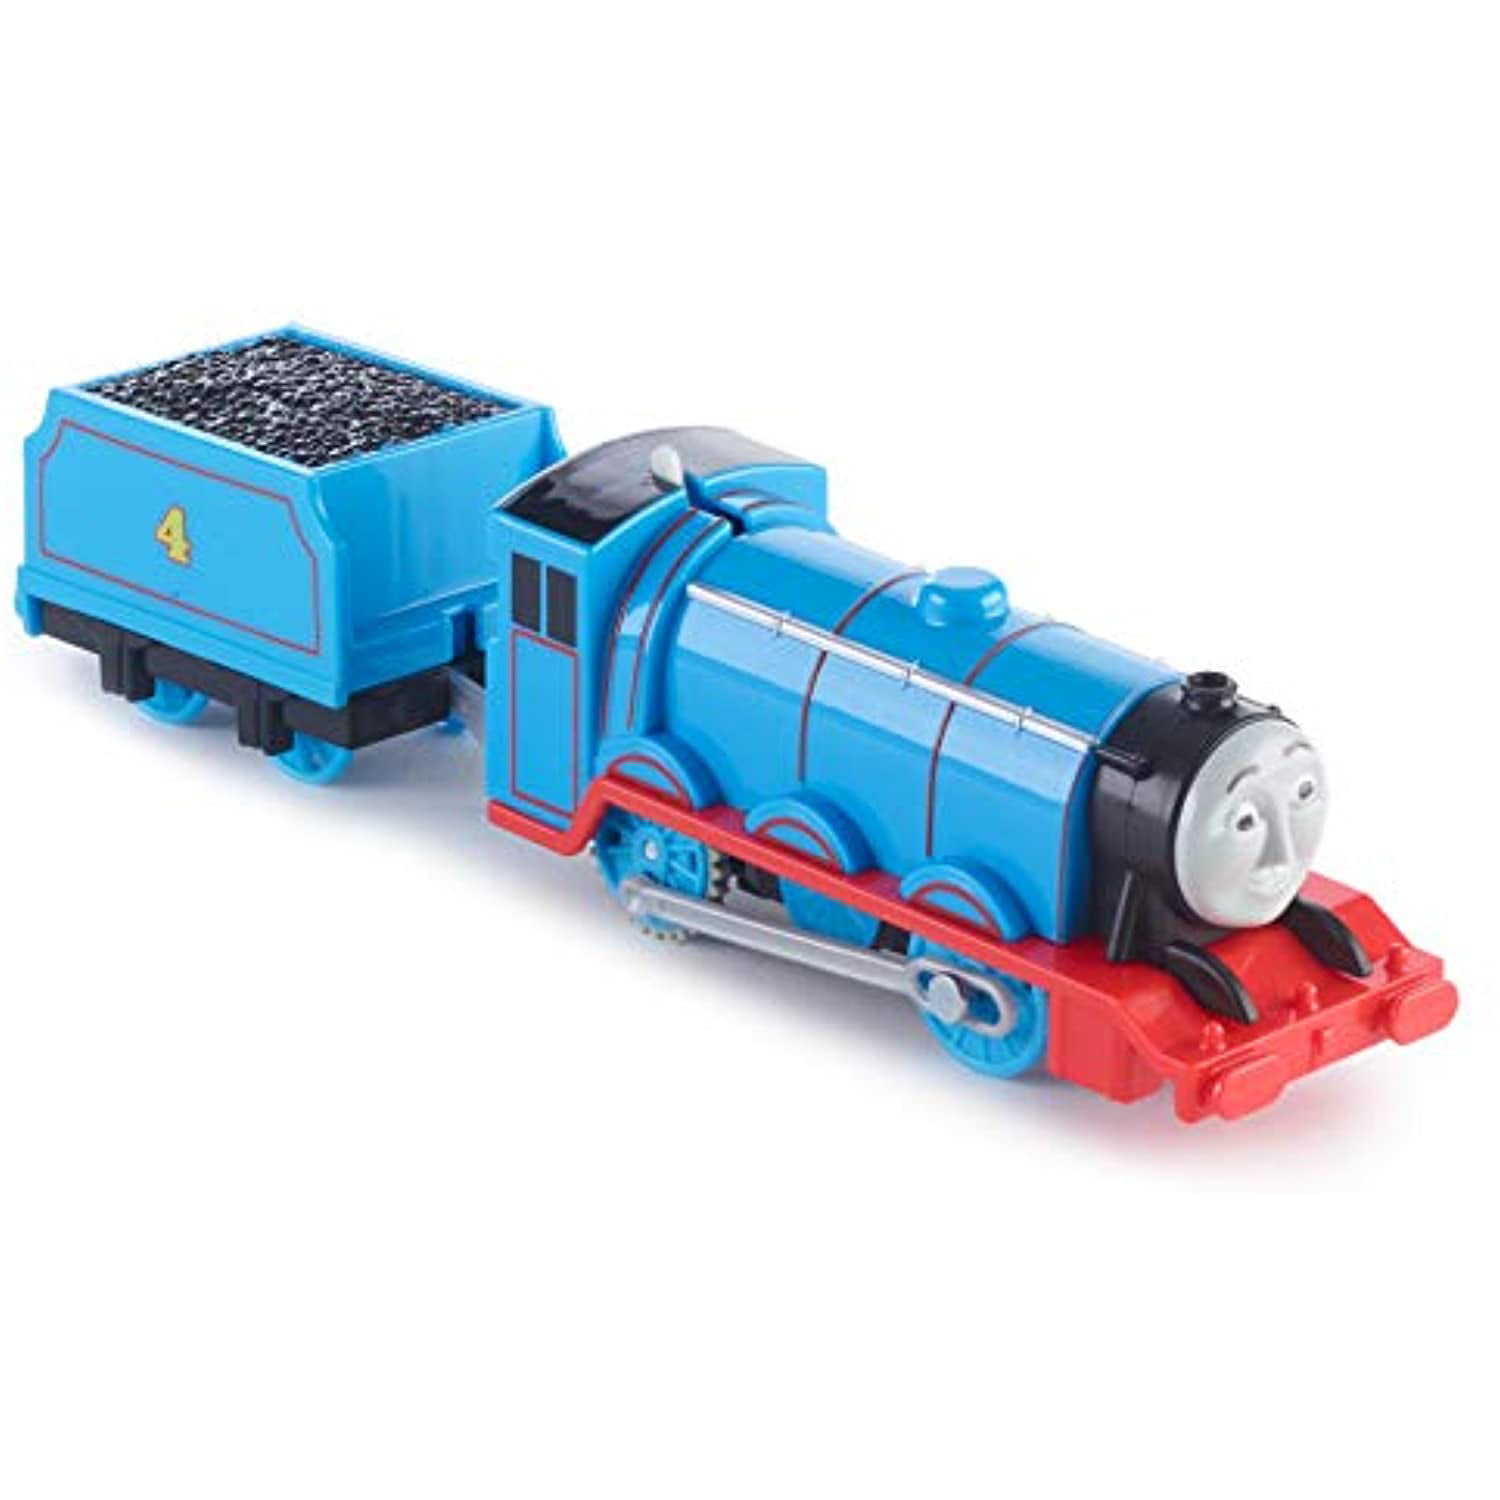 Fisher-Price Thomas and Friends TrackMaster Motorized Gordon Engine Blue for sale online